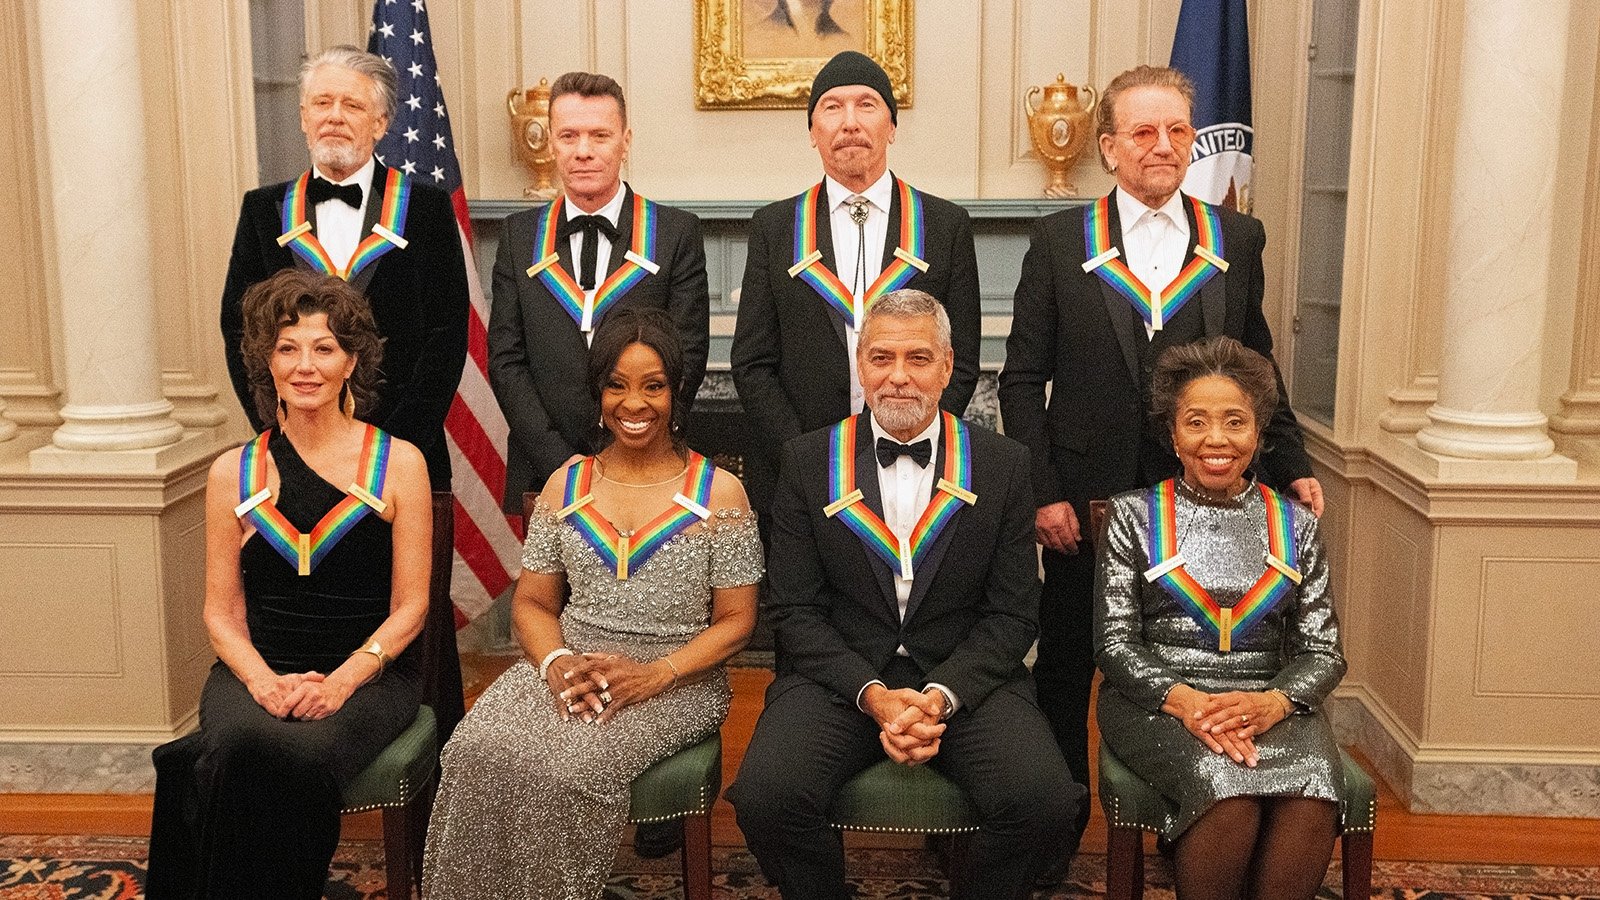 Knight, Clooney, Grant feted at Kennedy Center Honors WFMT